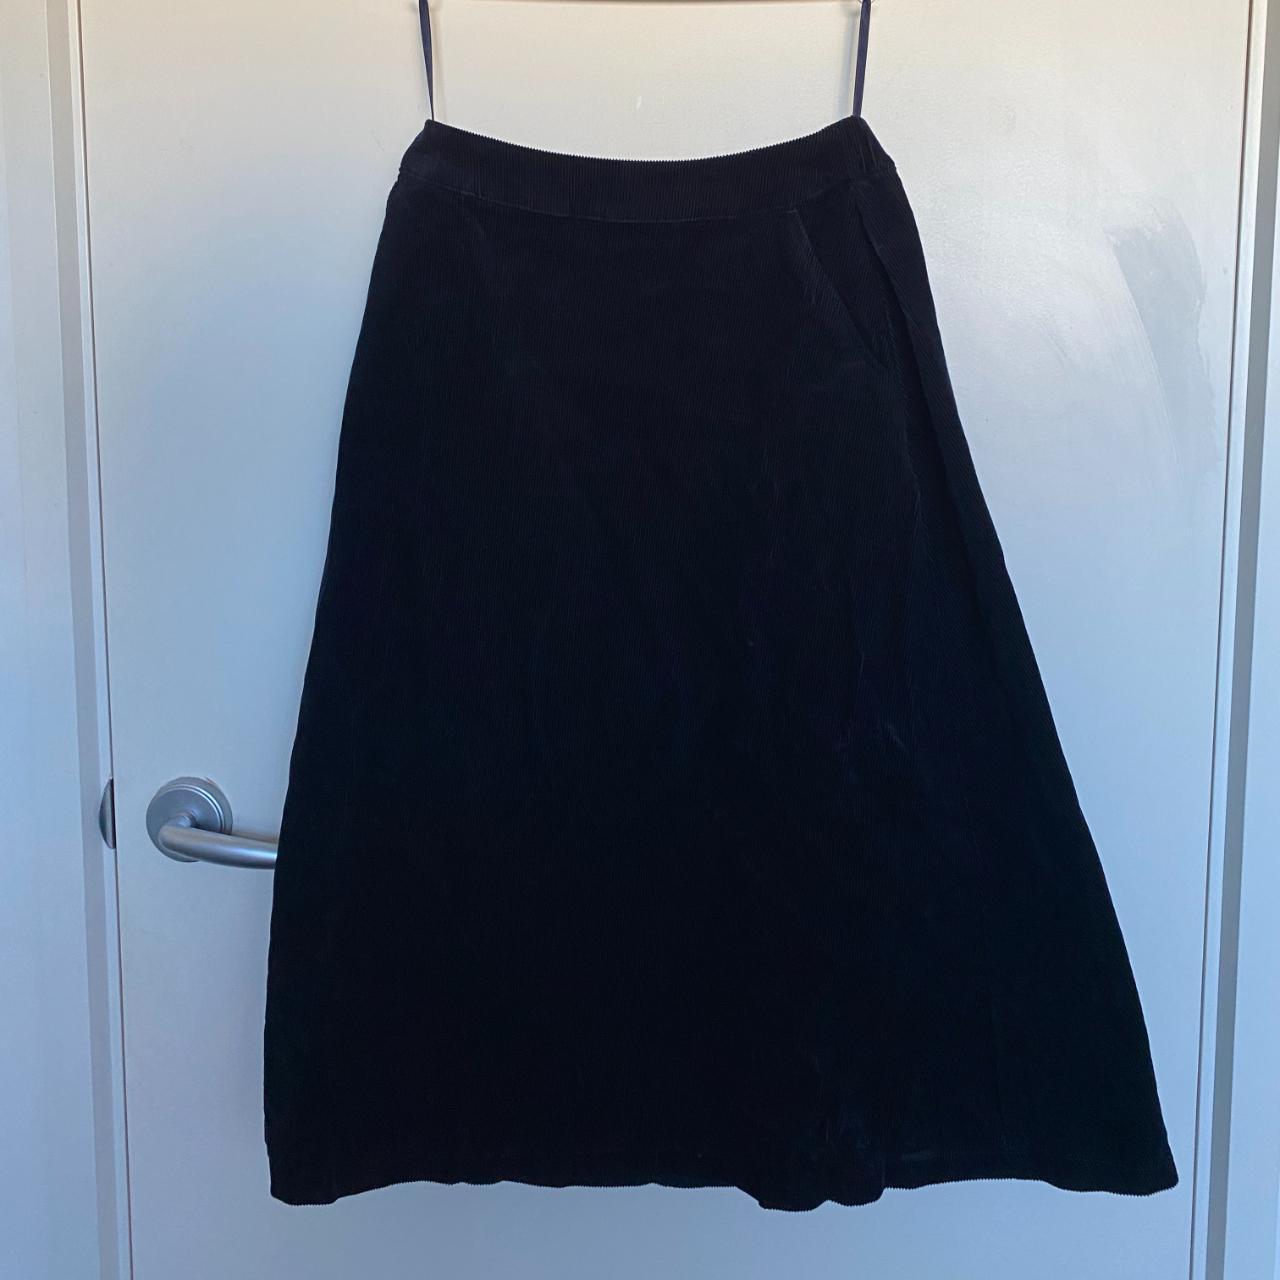 Uniqlo corduroy navy skirt size M Brand new with... - Depop